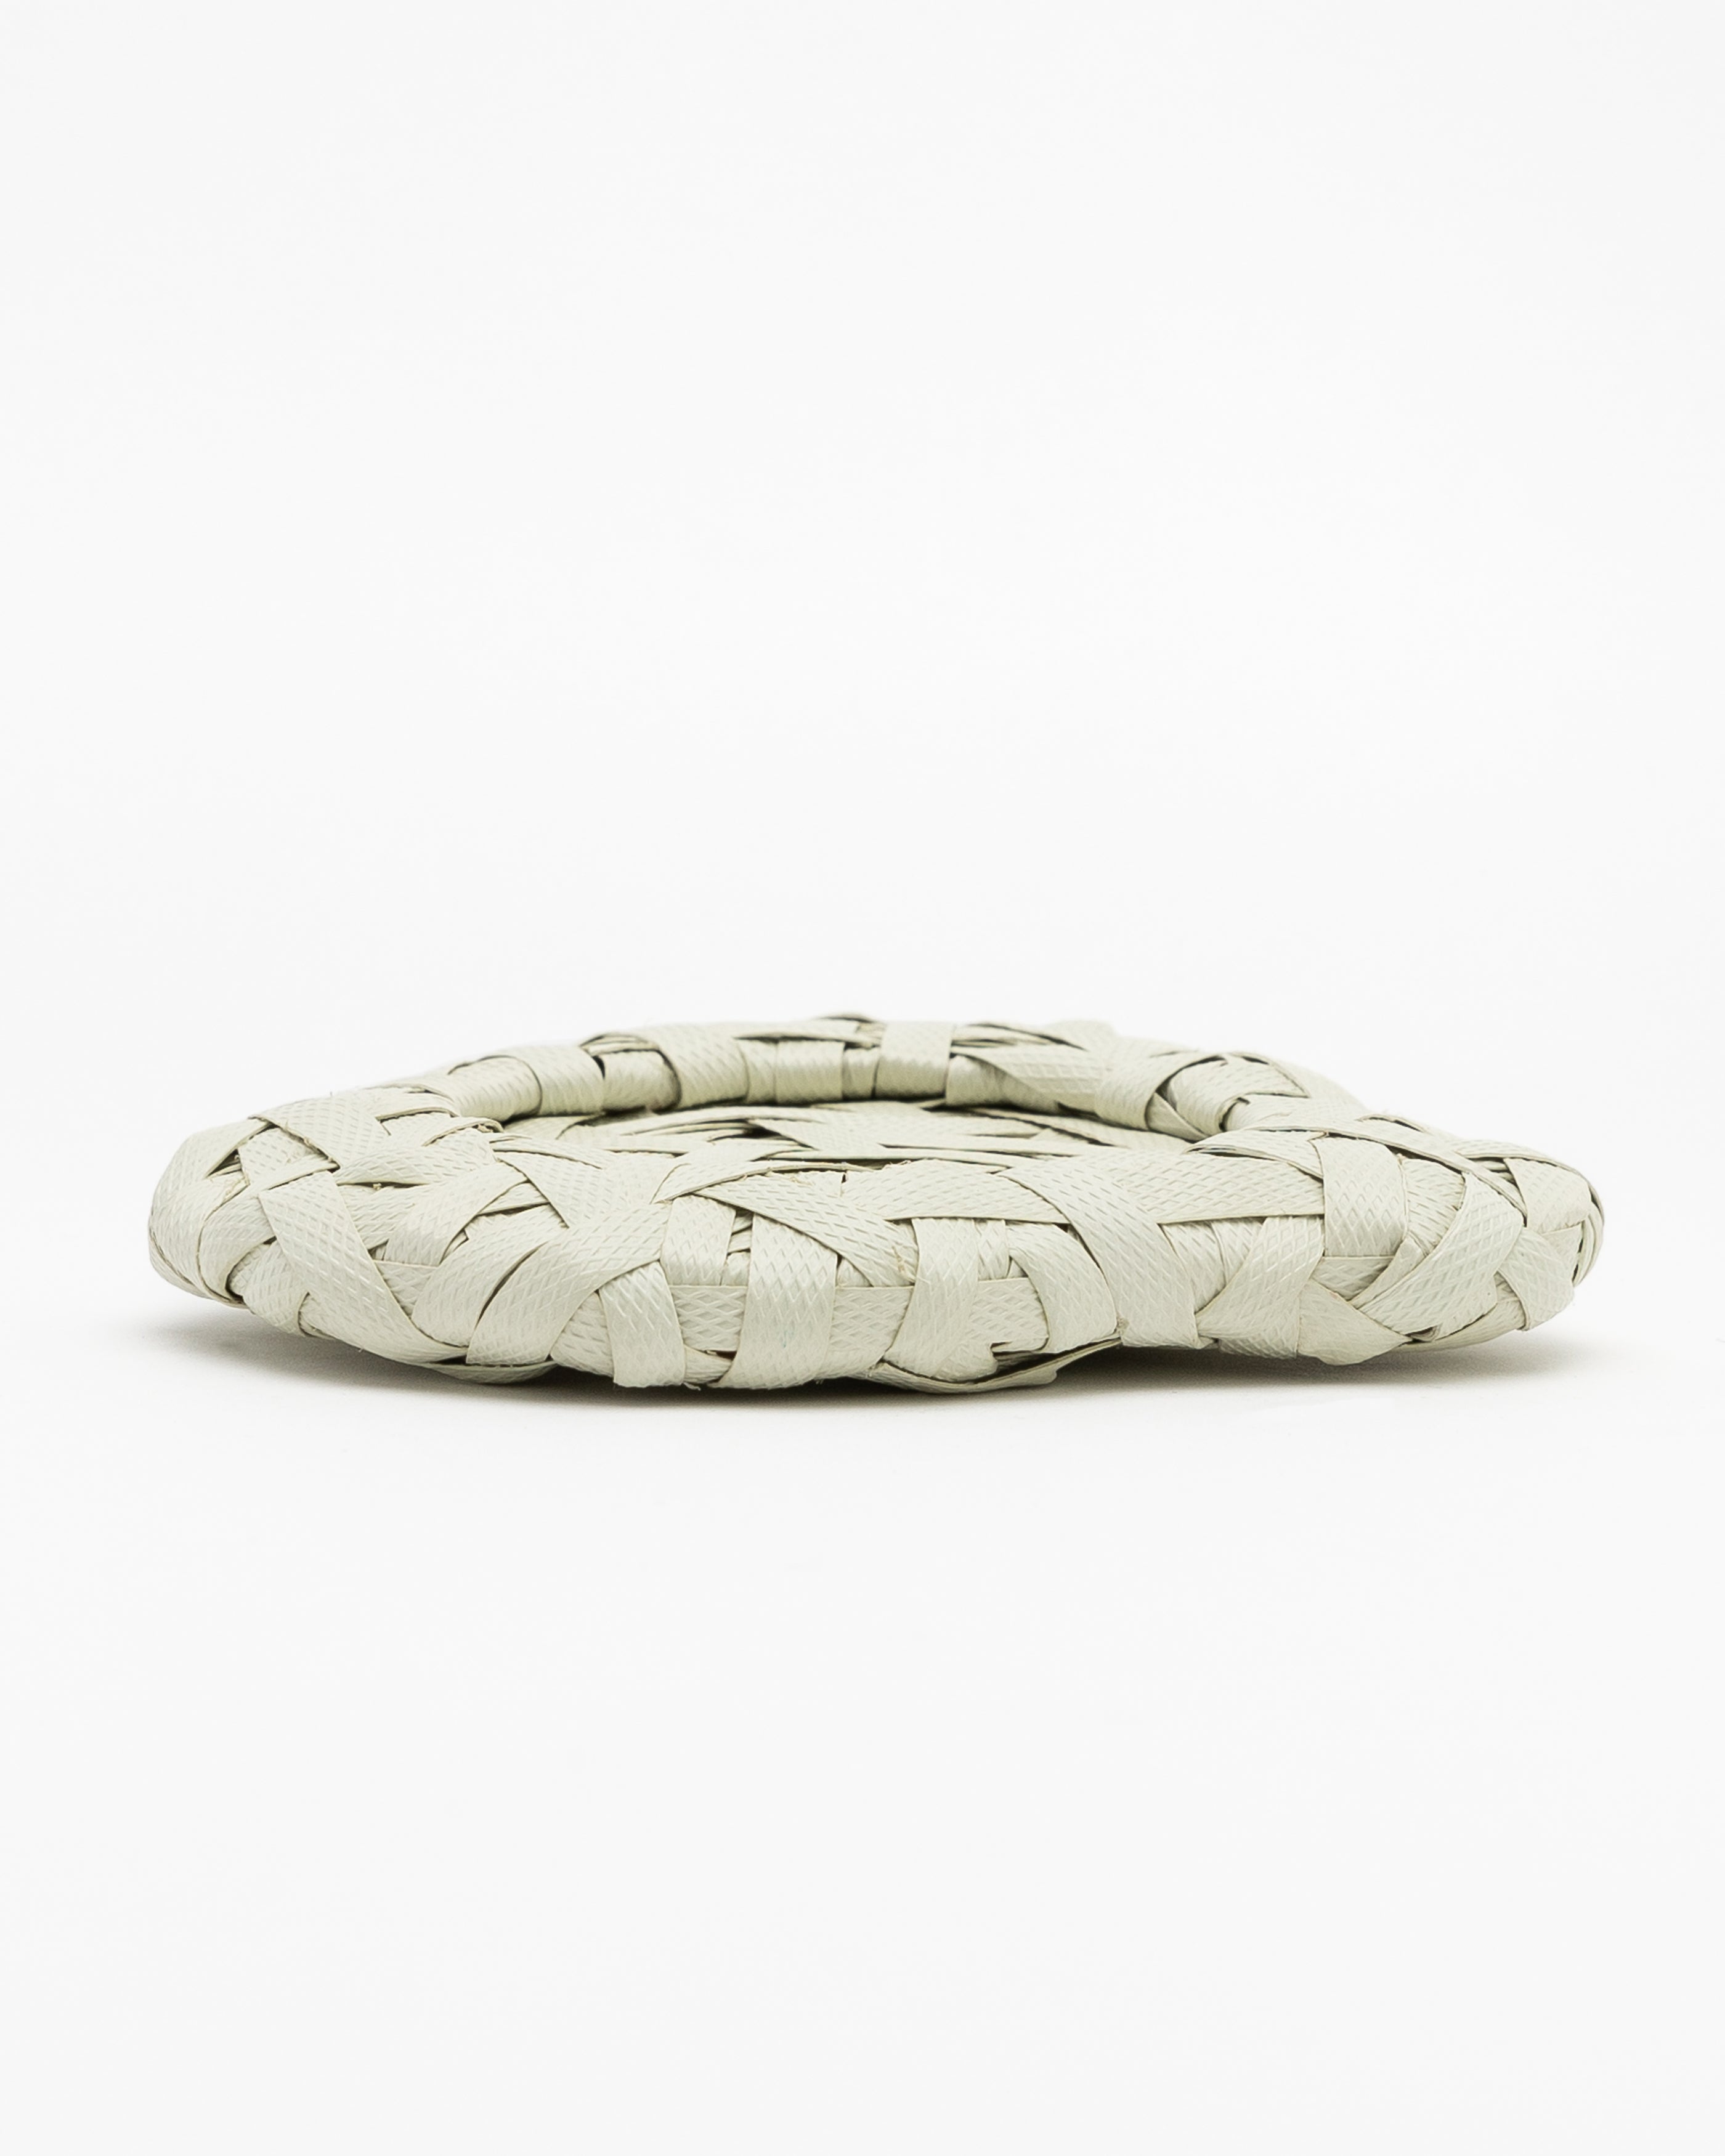 Woven Ecology Coaster in White